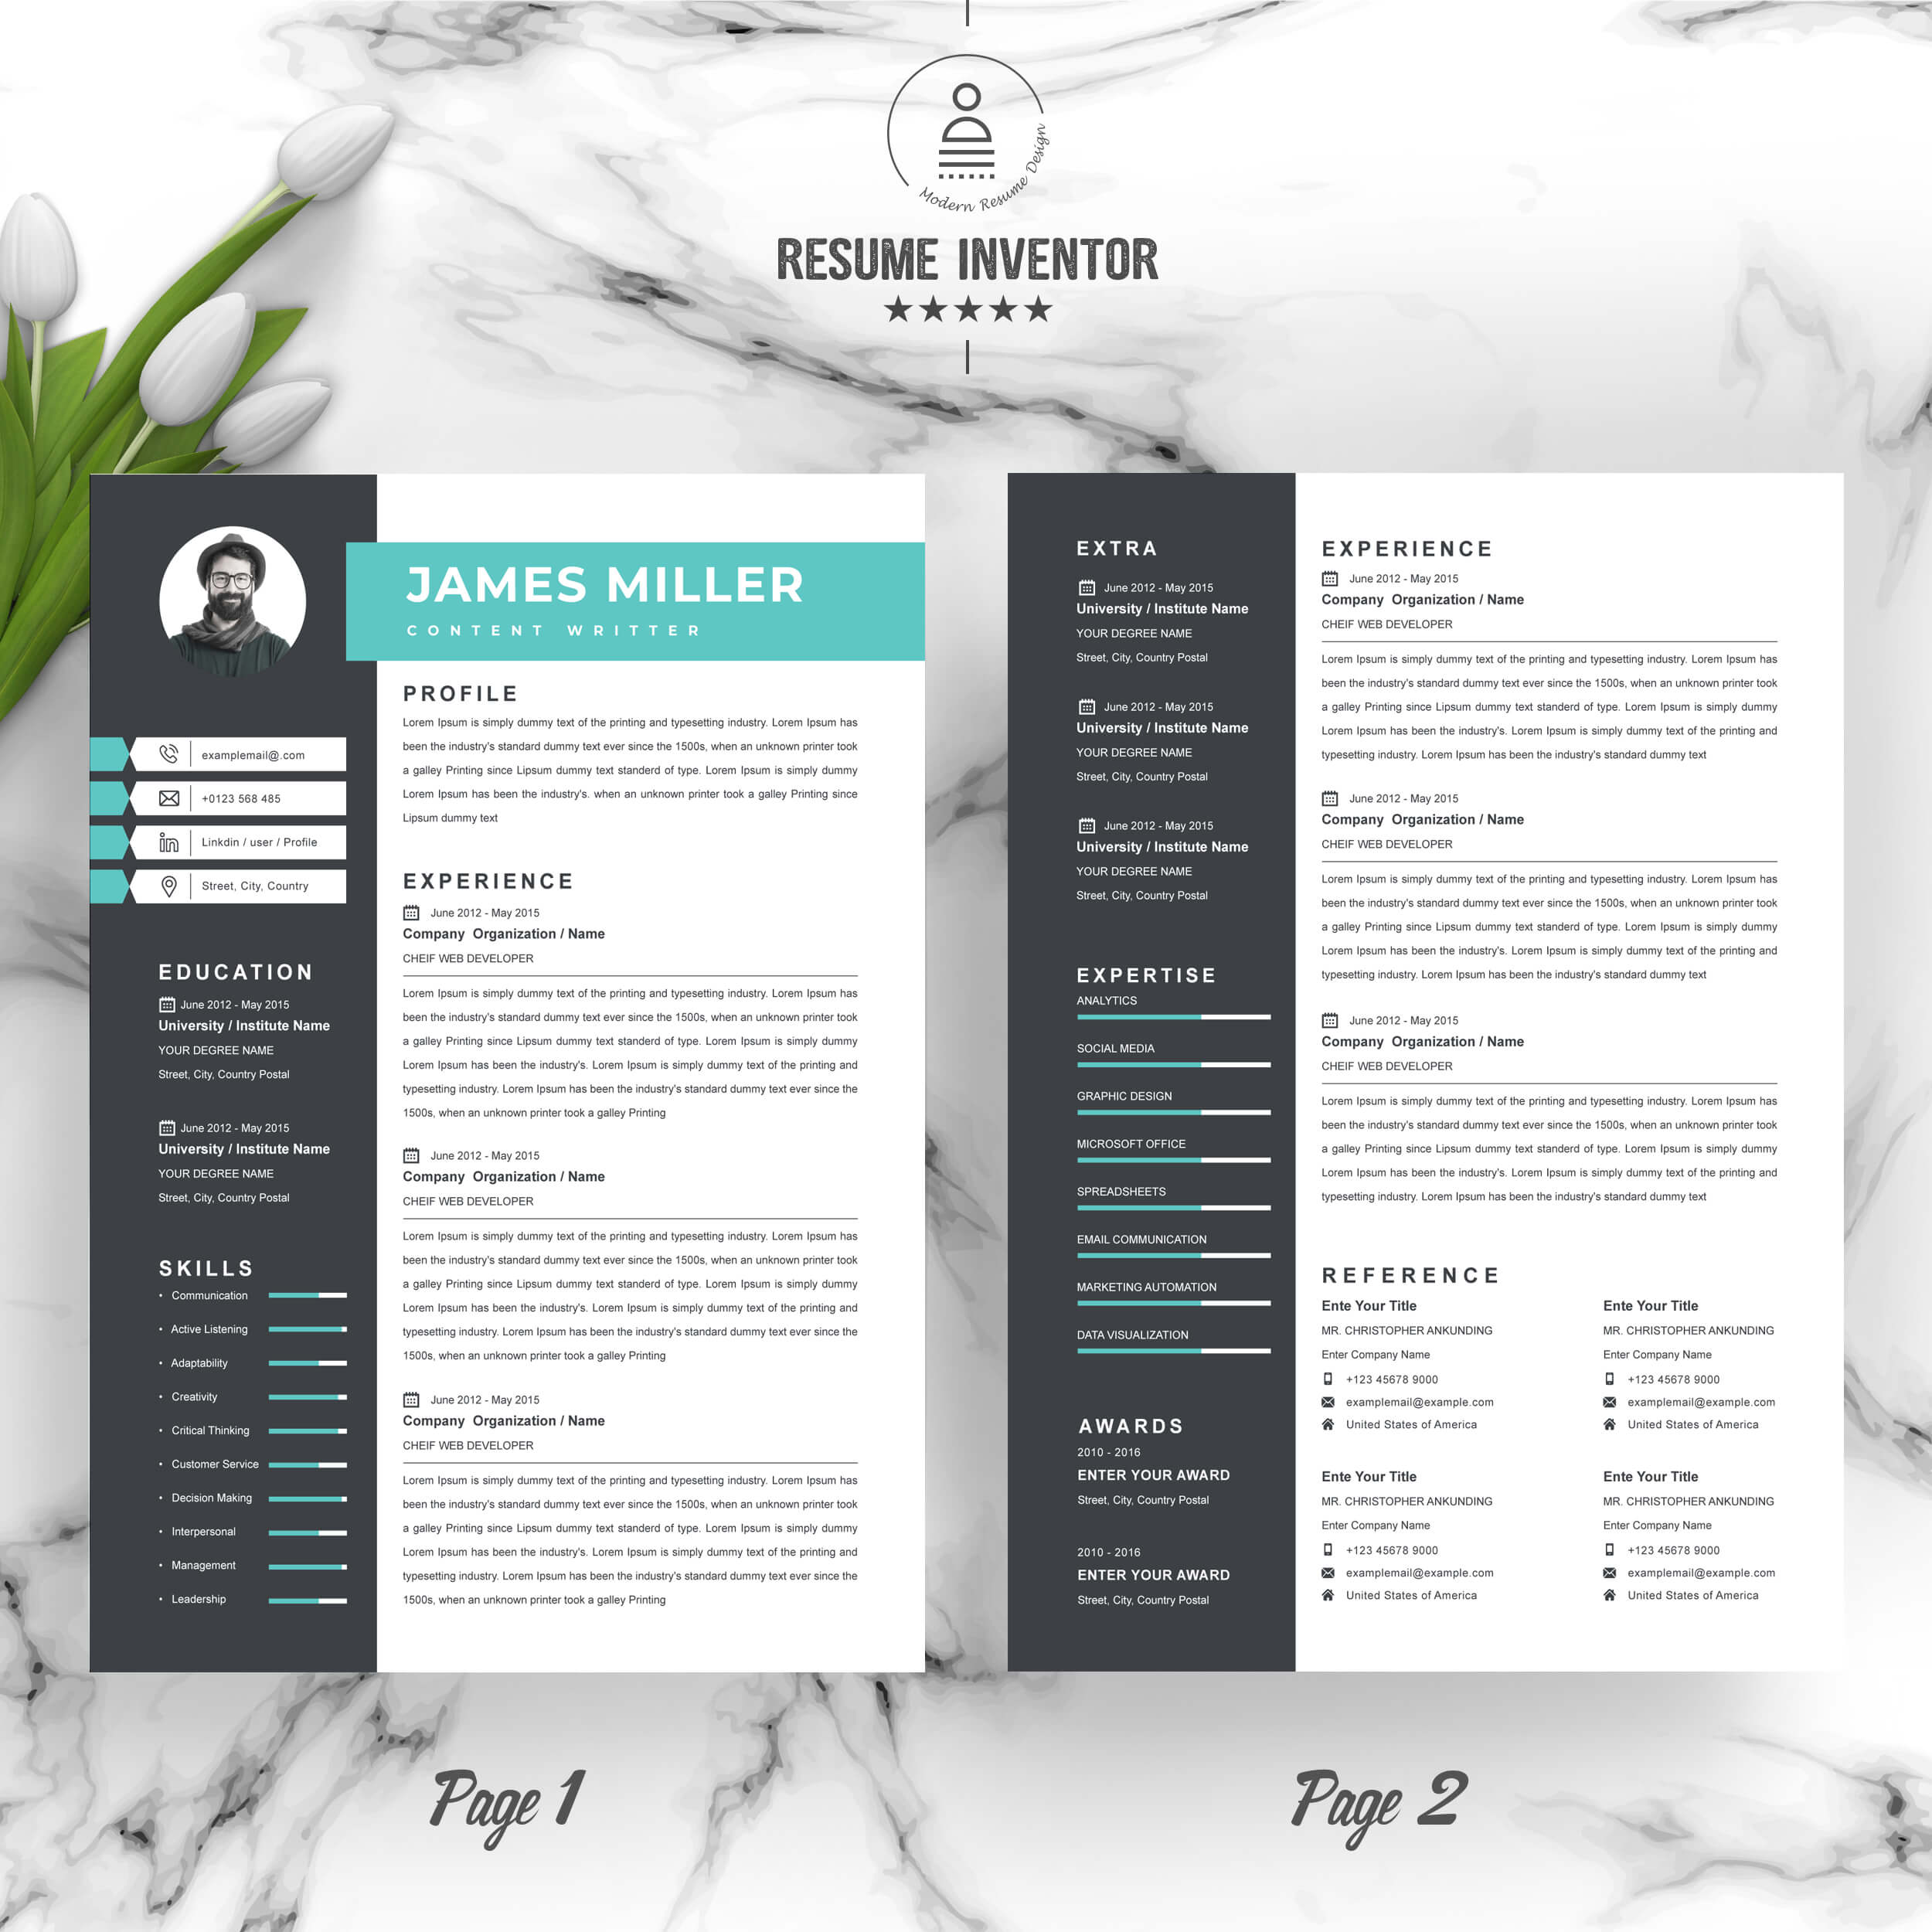 Content Writer Professional Resume Template | CV Template | Resume Template in Word PSD Format preview image.